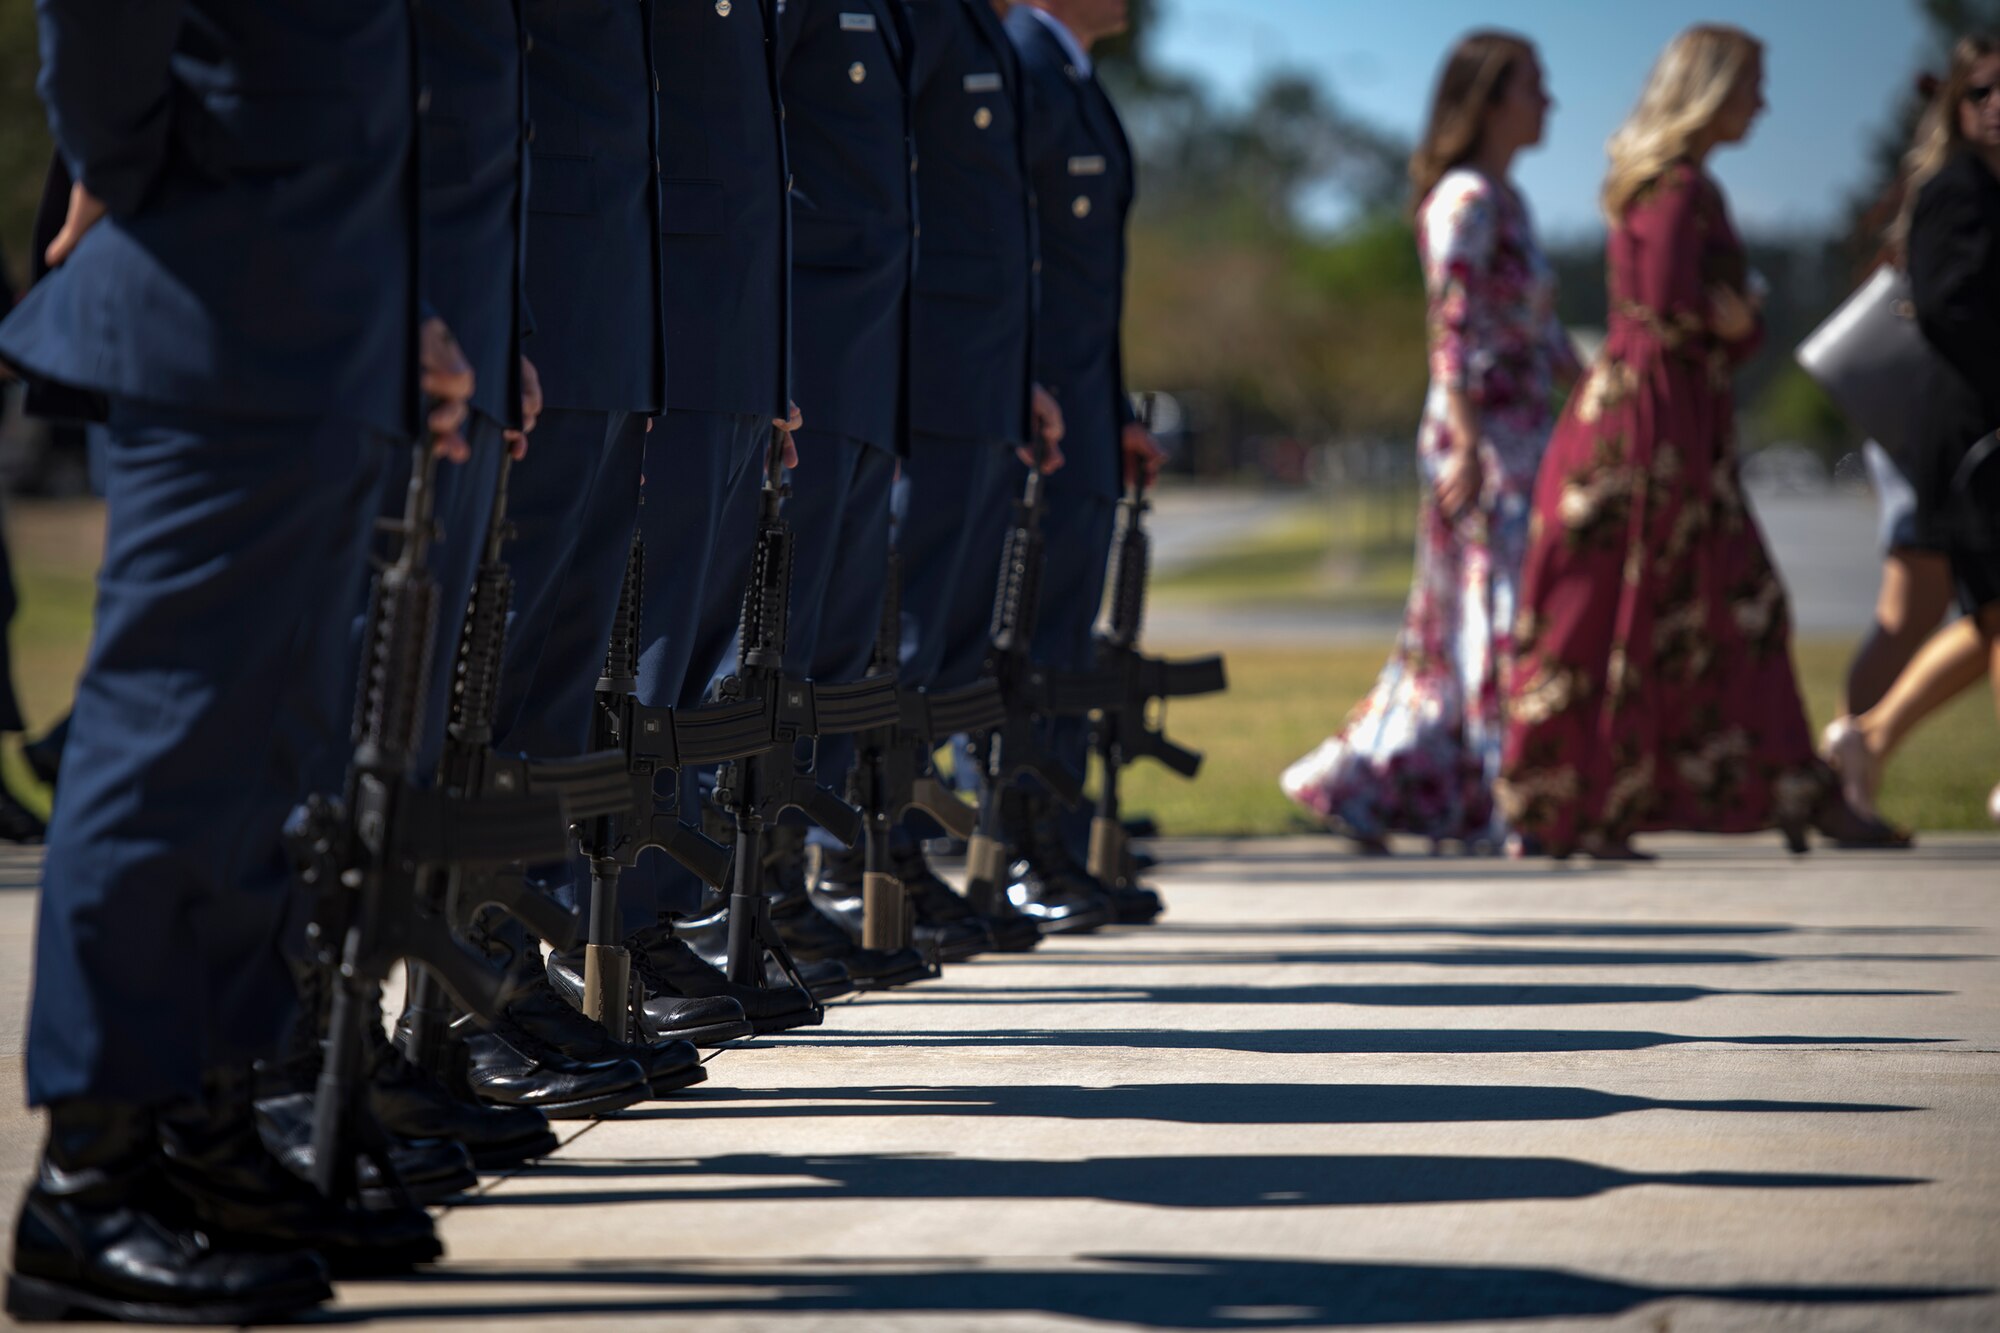 Pararescuemen from the 38th Rescue Squadron stand ready to render a 21-gun salute following a memorial service in honor of Capt. Mark Weber, March 21, 2018, at Moody Air Force Base, Ga. Weber, a 38th RQS combat rescue officer and Texas native, was killed in an HH-60G Pave Hawk crash in Anbar Province, Iraq, March 15. During the ceremony, Weber was posthumously awarded a Meritorious Service Medal and the Air Force Commendation Medal. (U.S. Air Force photo by Staff Sgt. Ryan Callaghan)